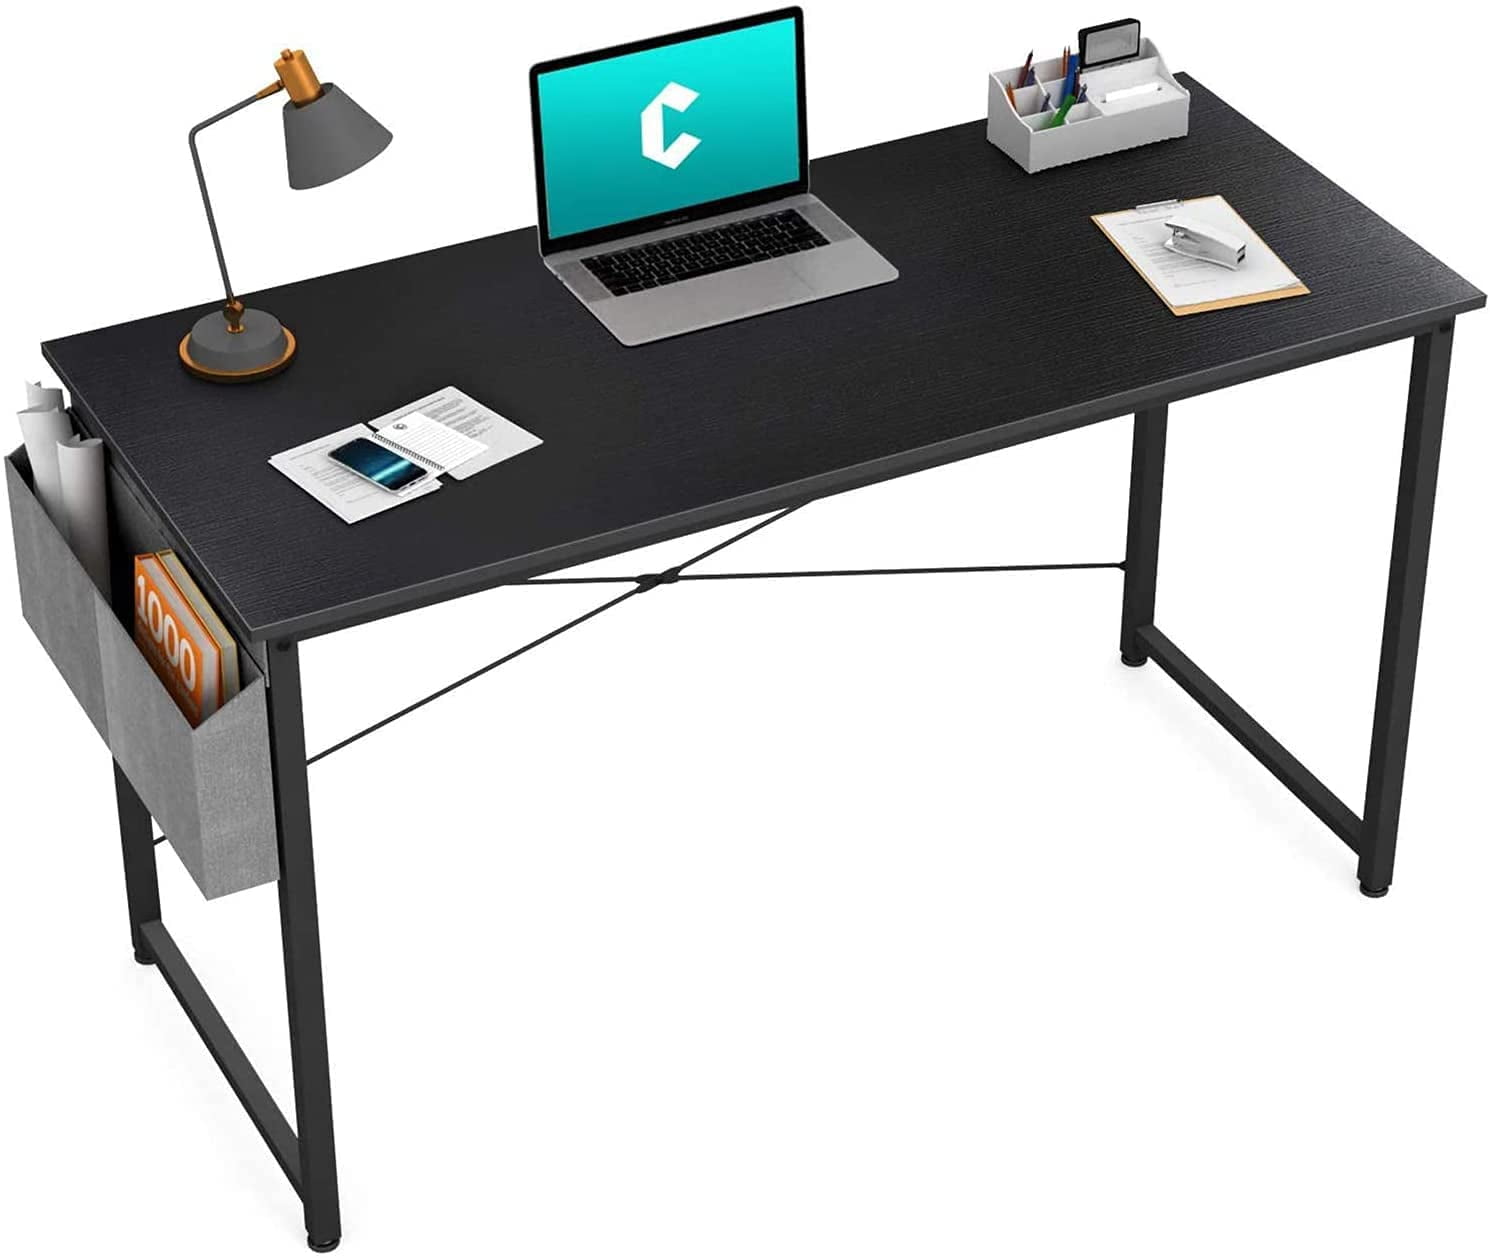 40 inch Home Office Study Desk,Modern Simple Style Laptop Table with Storage Bag 